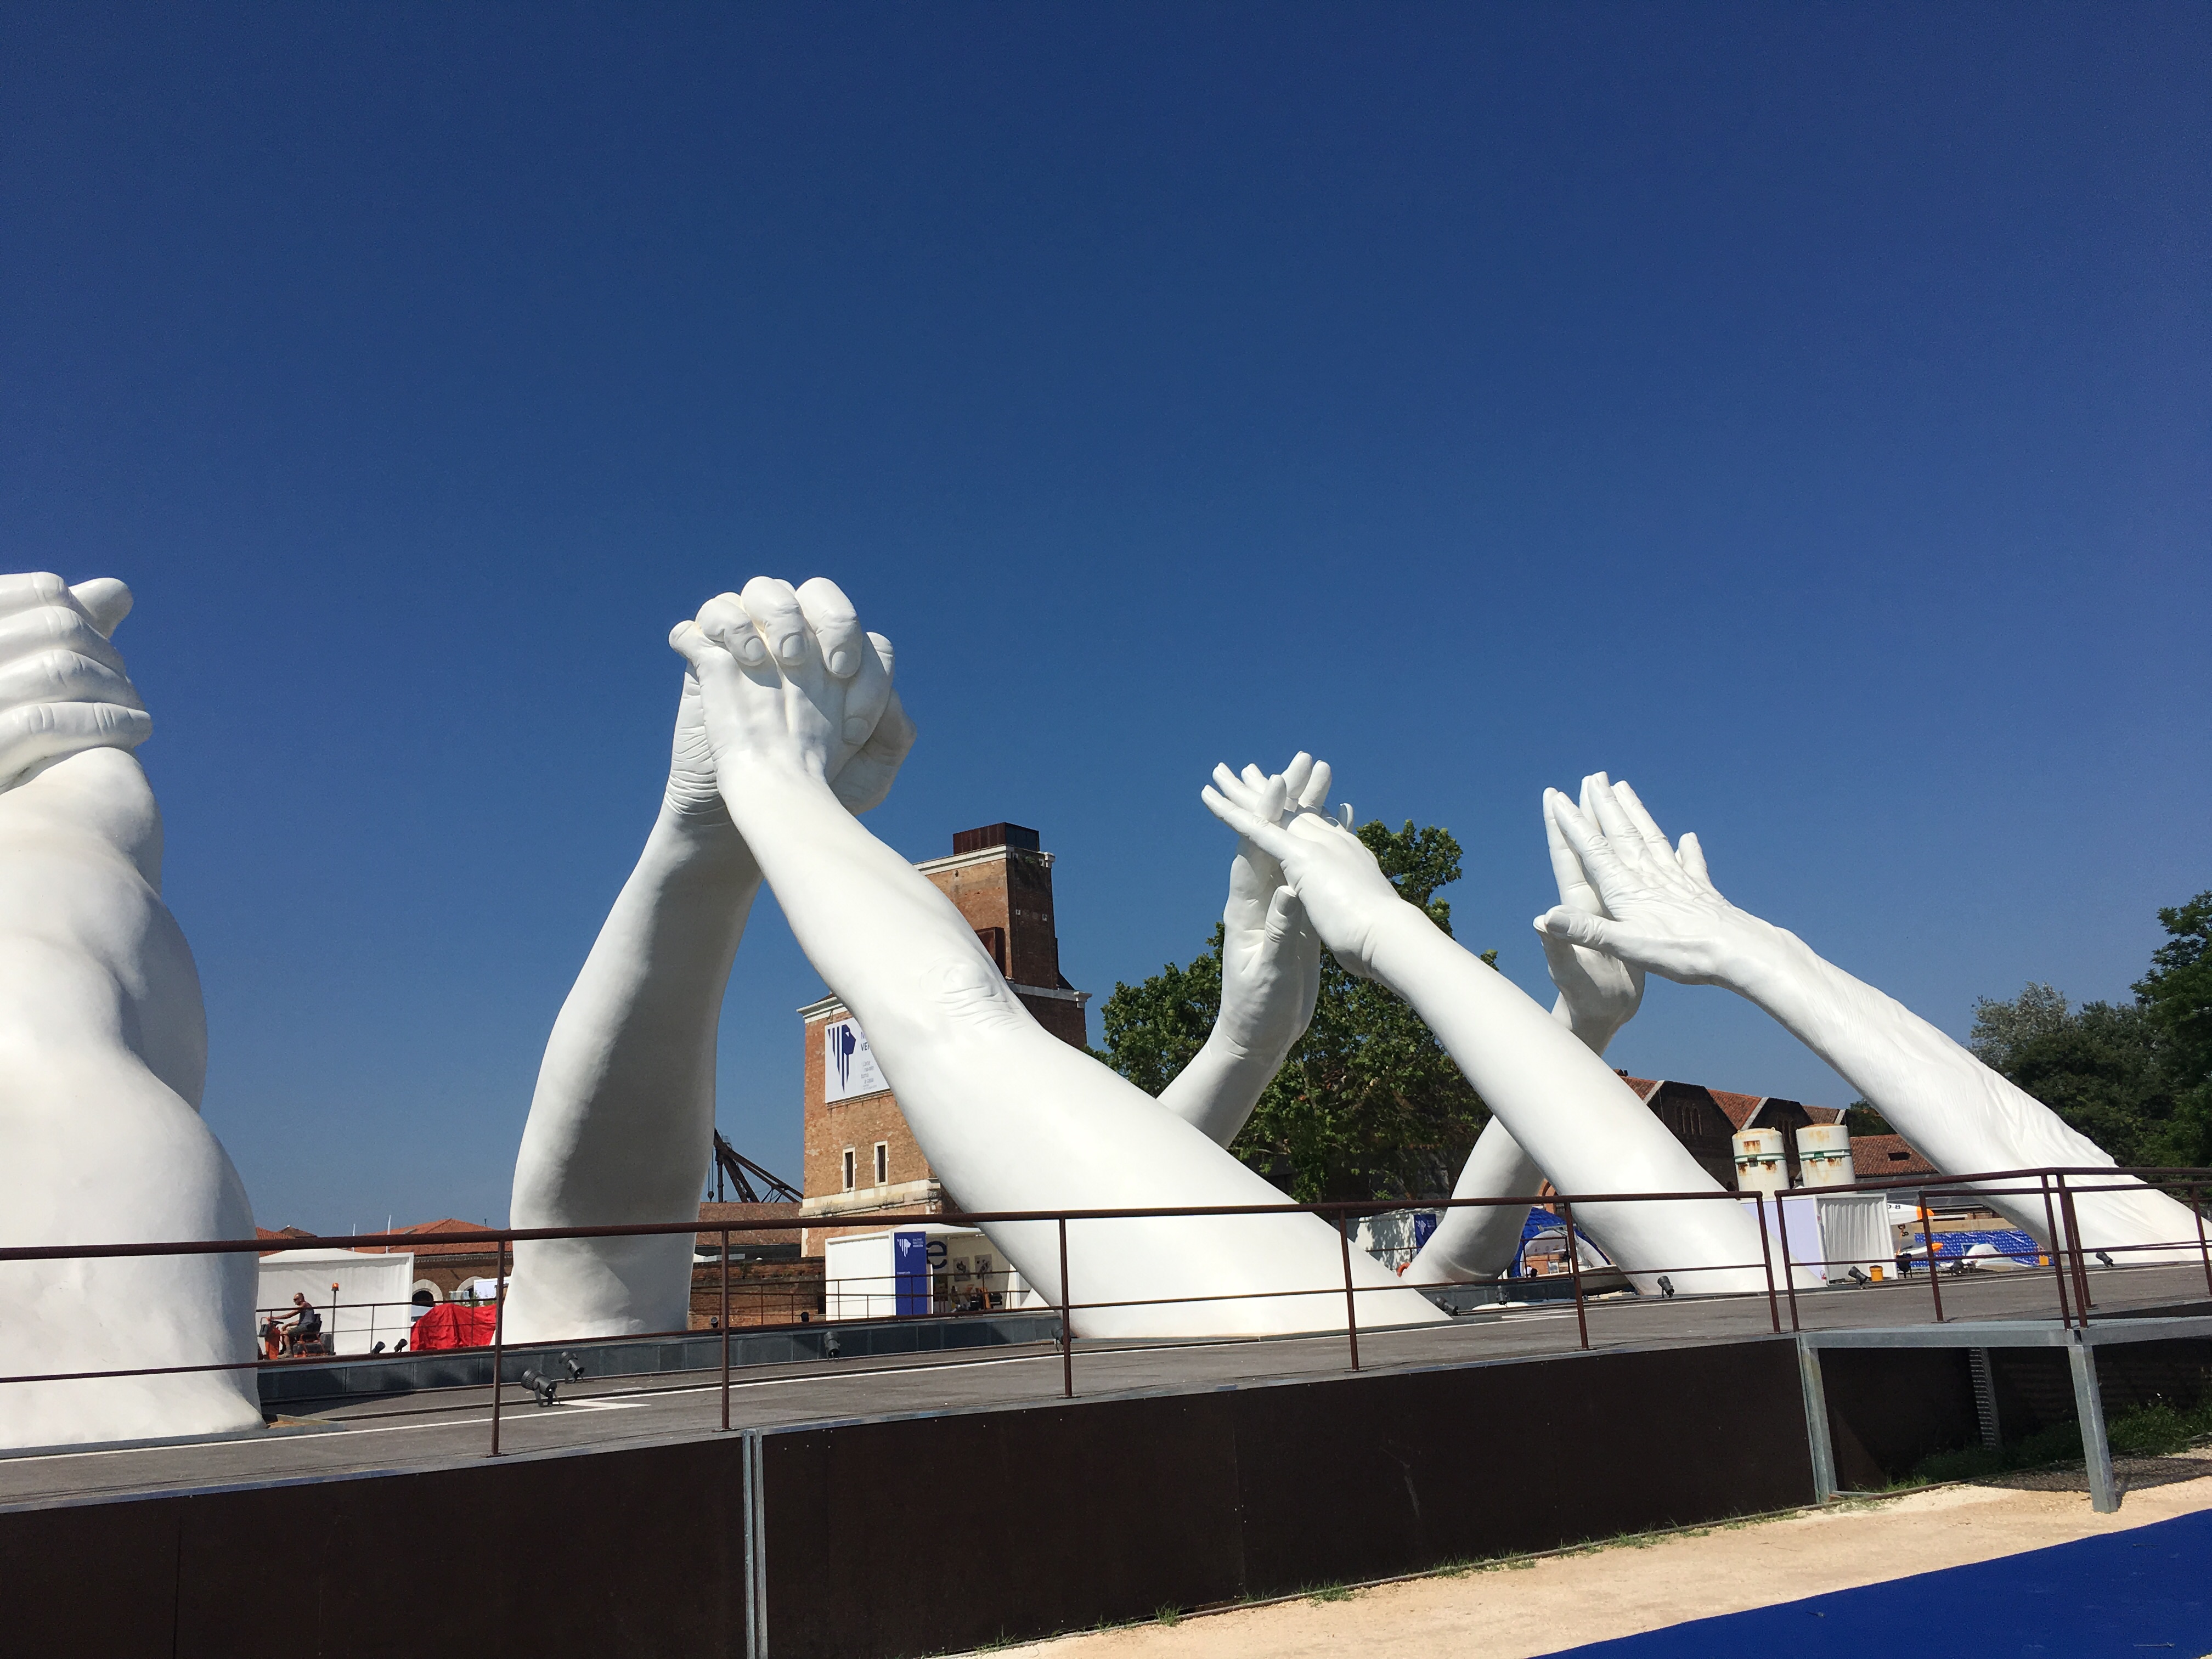 Lorenzo Quinn's 'Building Bridges' installed at one of the old dry docks east of Arsenale, Venezia